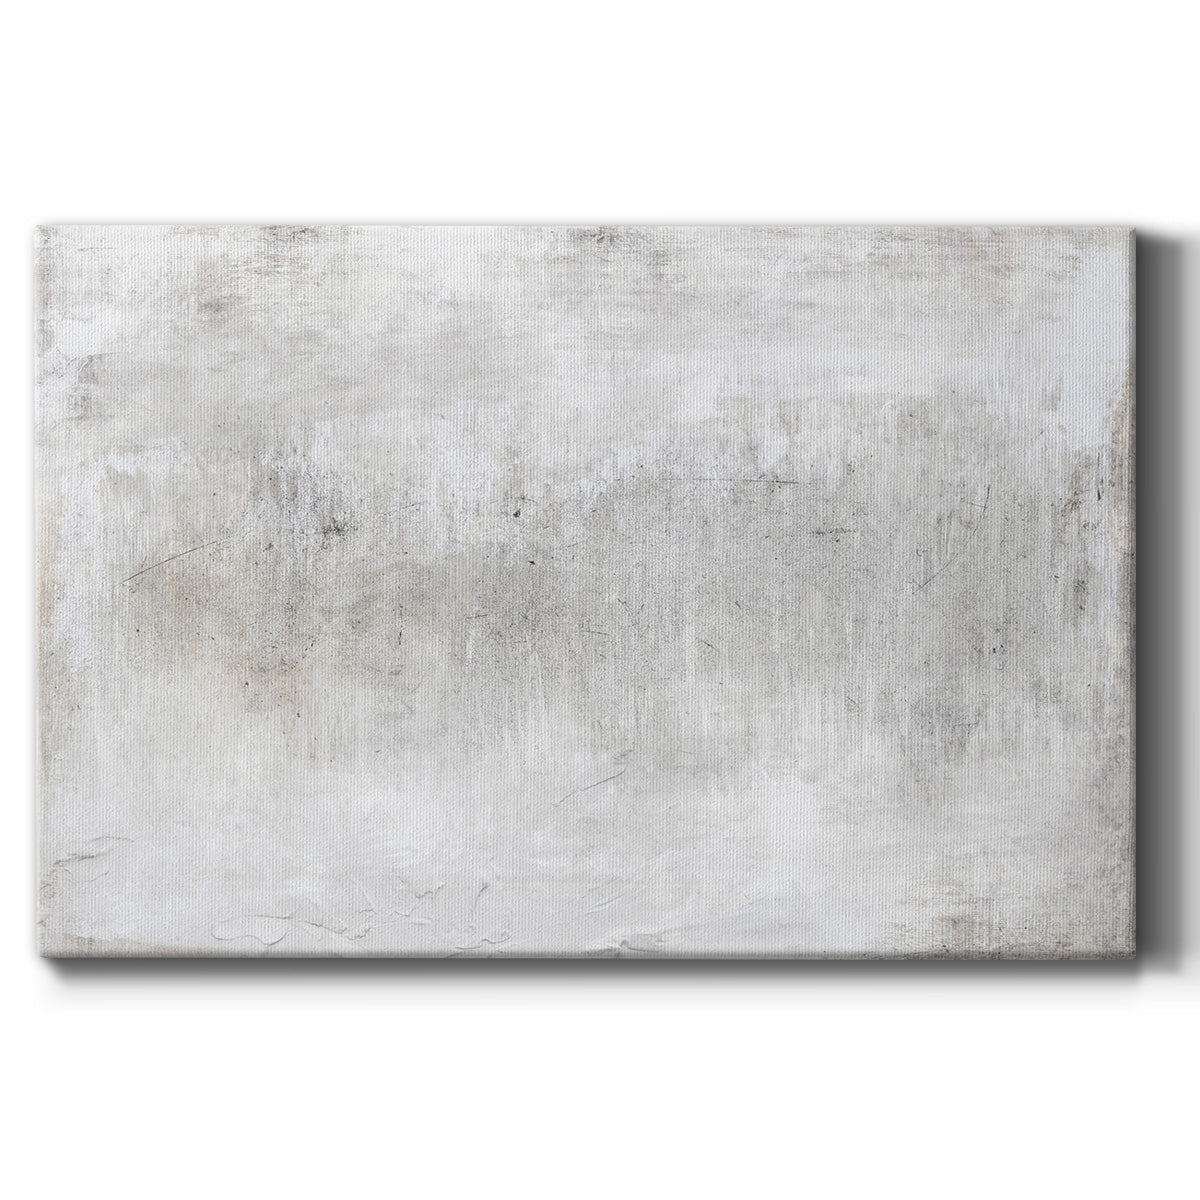 Ocean Breath Premium Gallery Wrapped Canvas - Ready to Hang